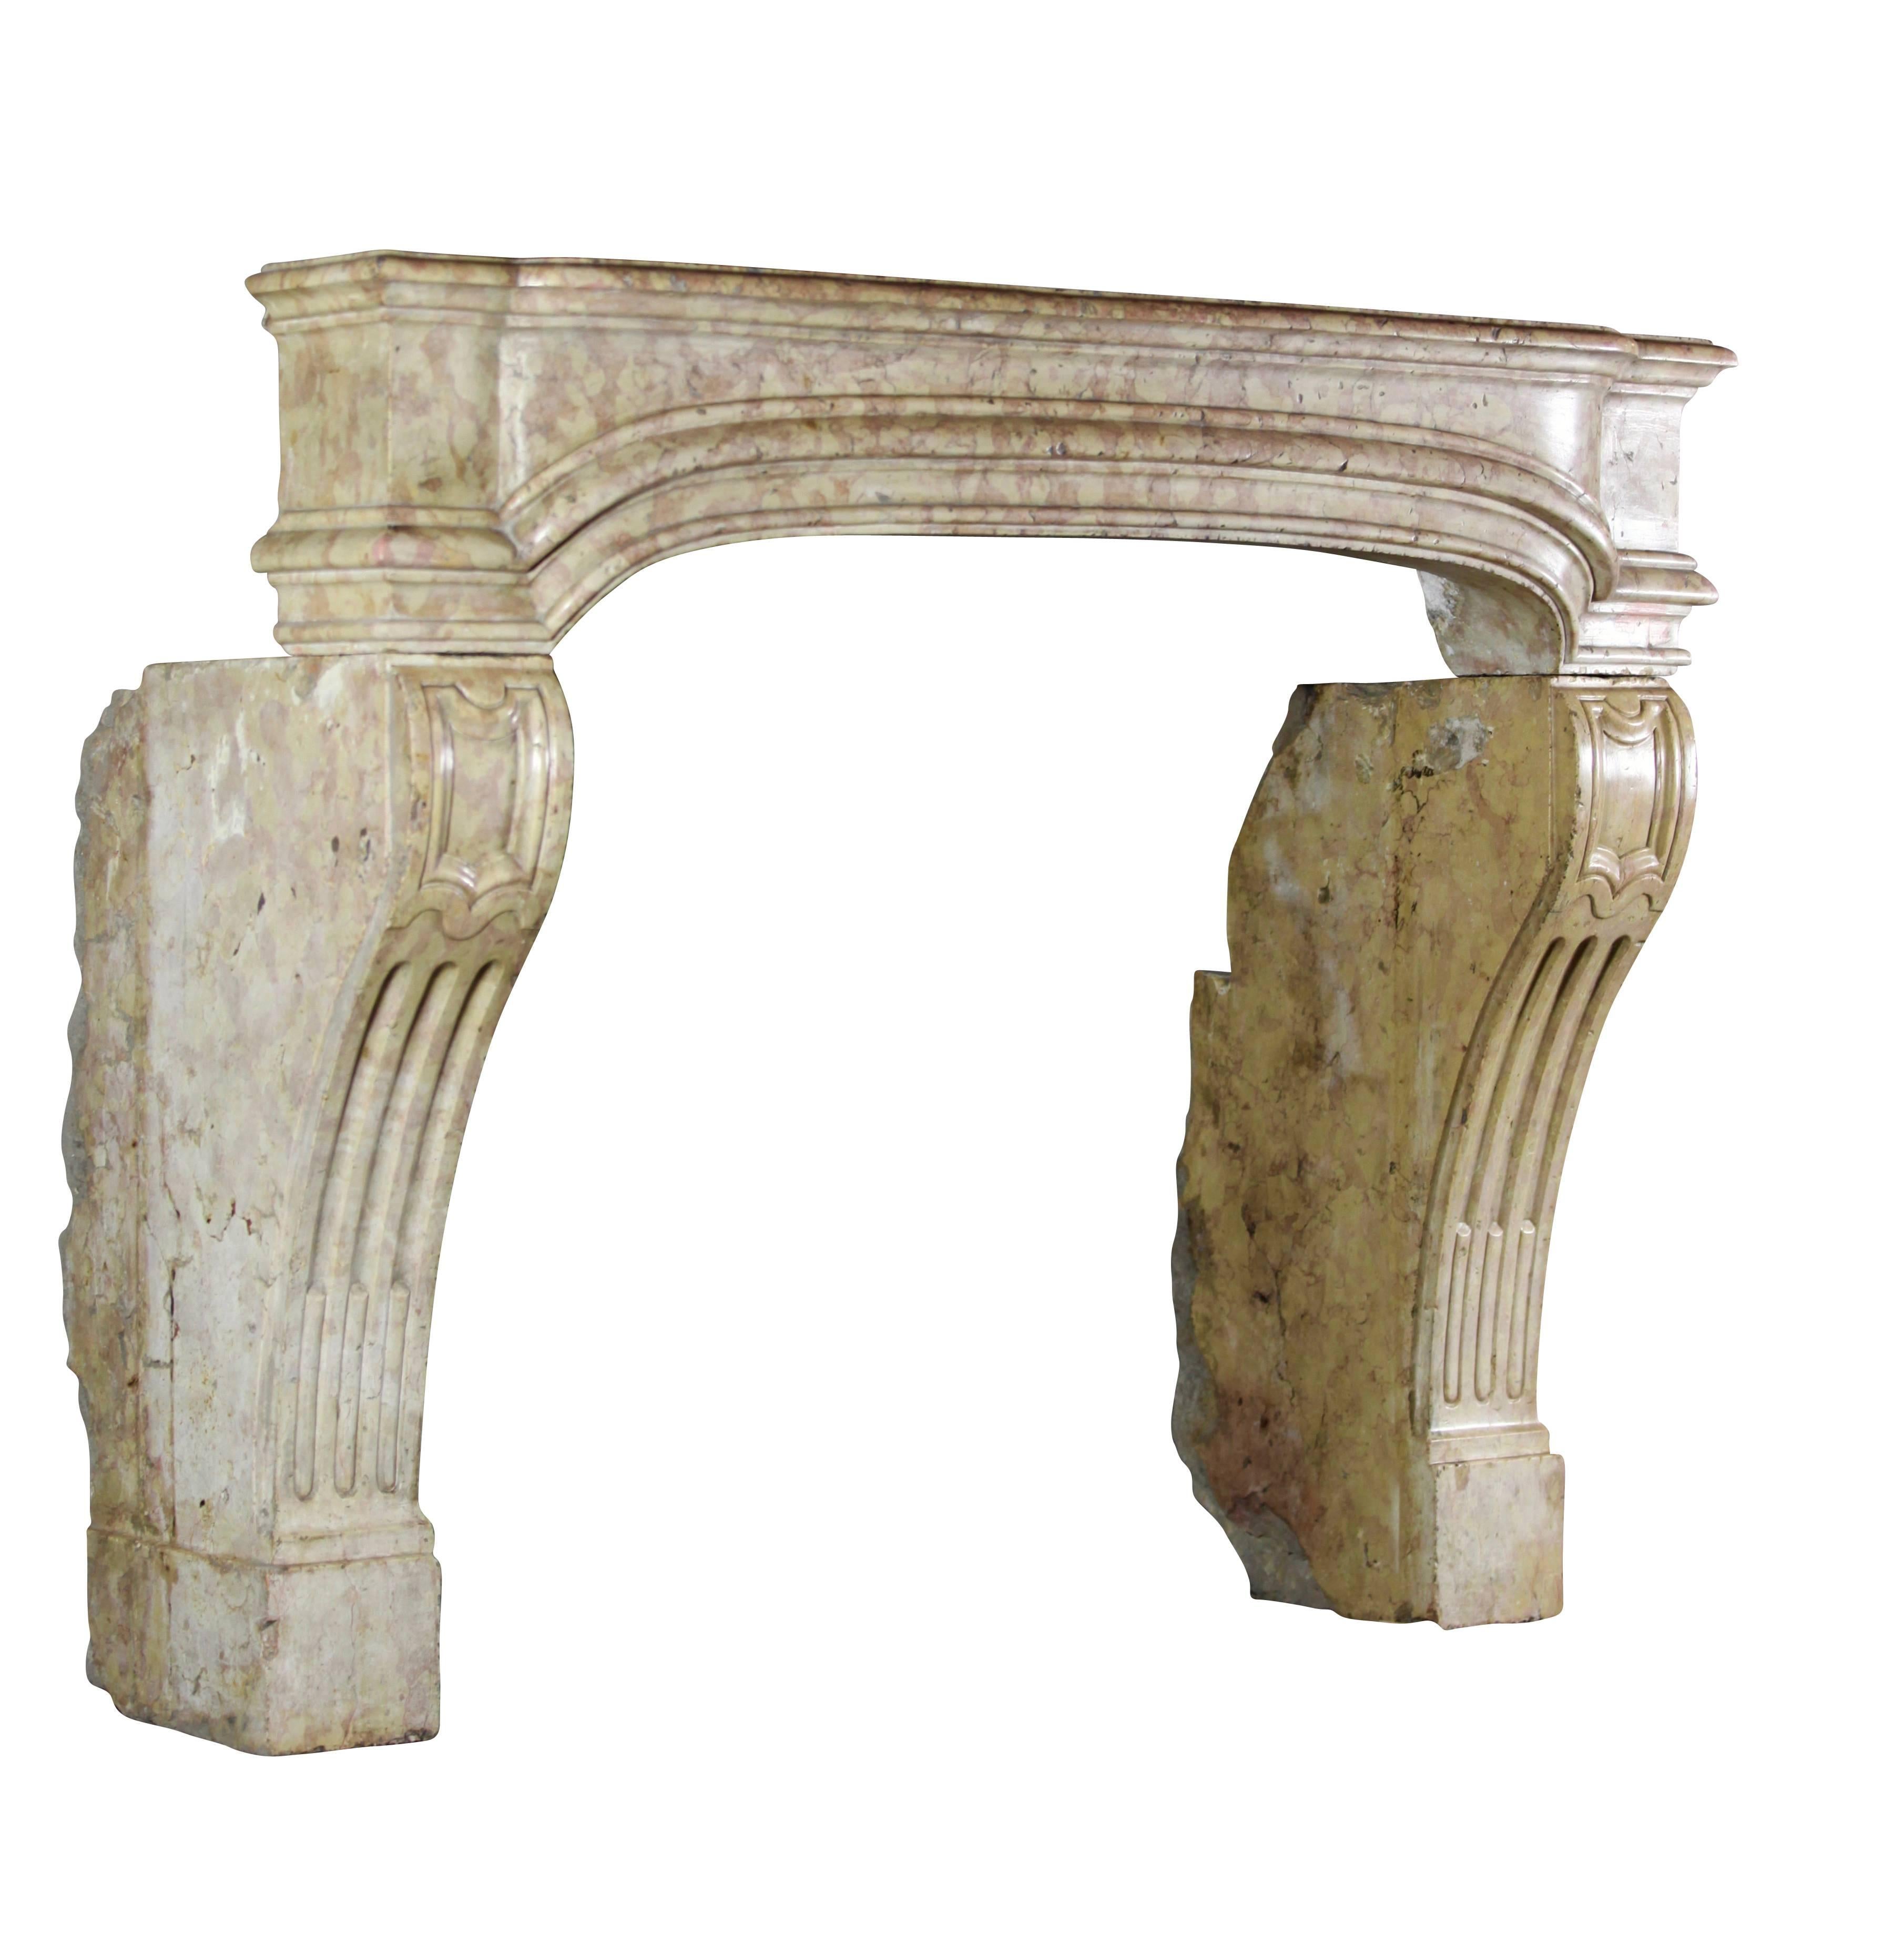 The proportions of this antique fireplace surround in French marble stone are very small and perfect for a smaller room or firebox. The depth of the carving is quite unique.

Measures:
135 cm EW 53.14".
109 cm EH 42.91".
99 cm IW